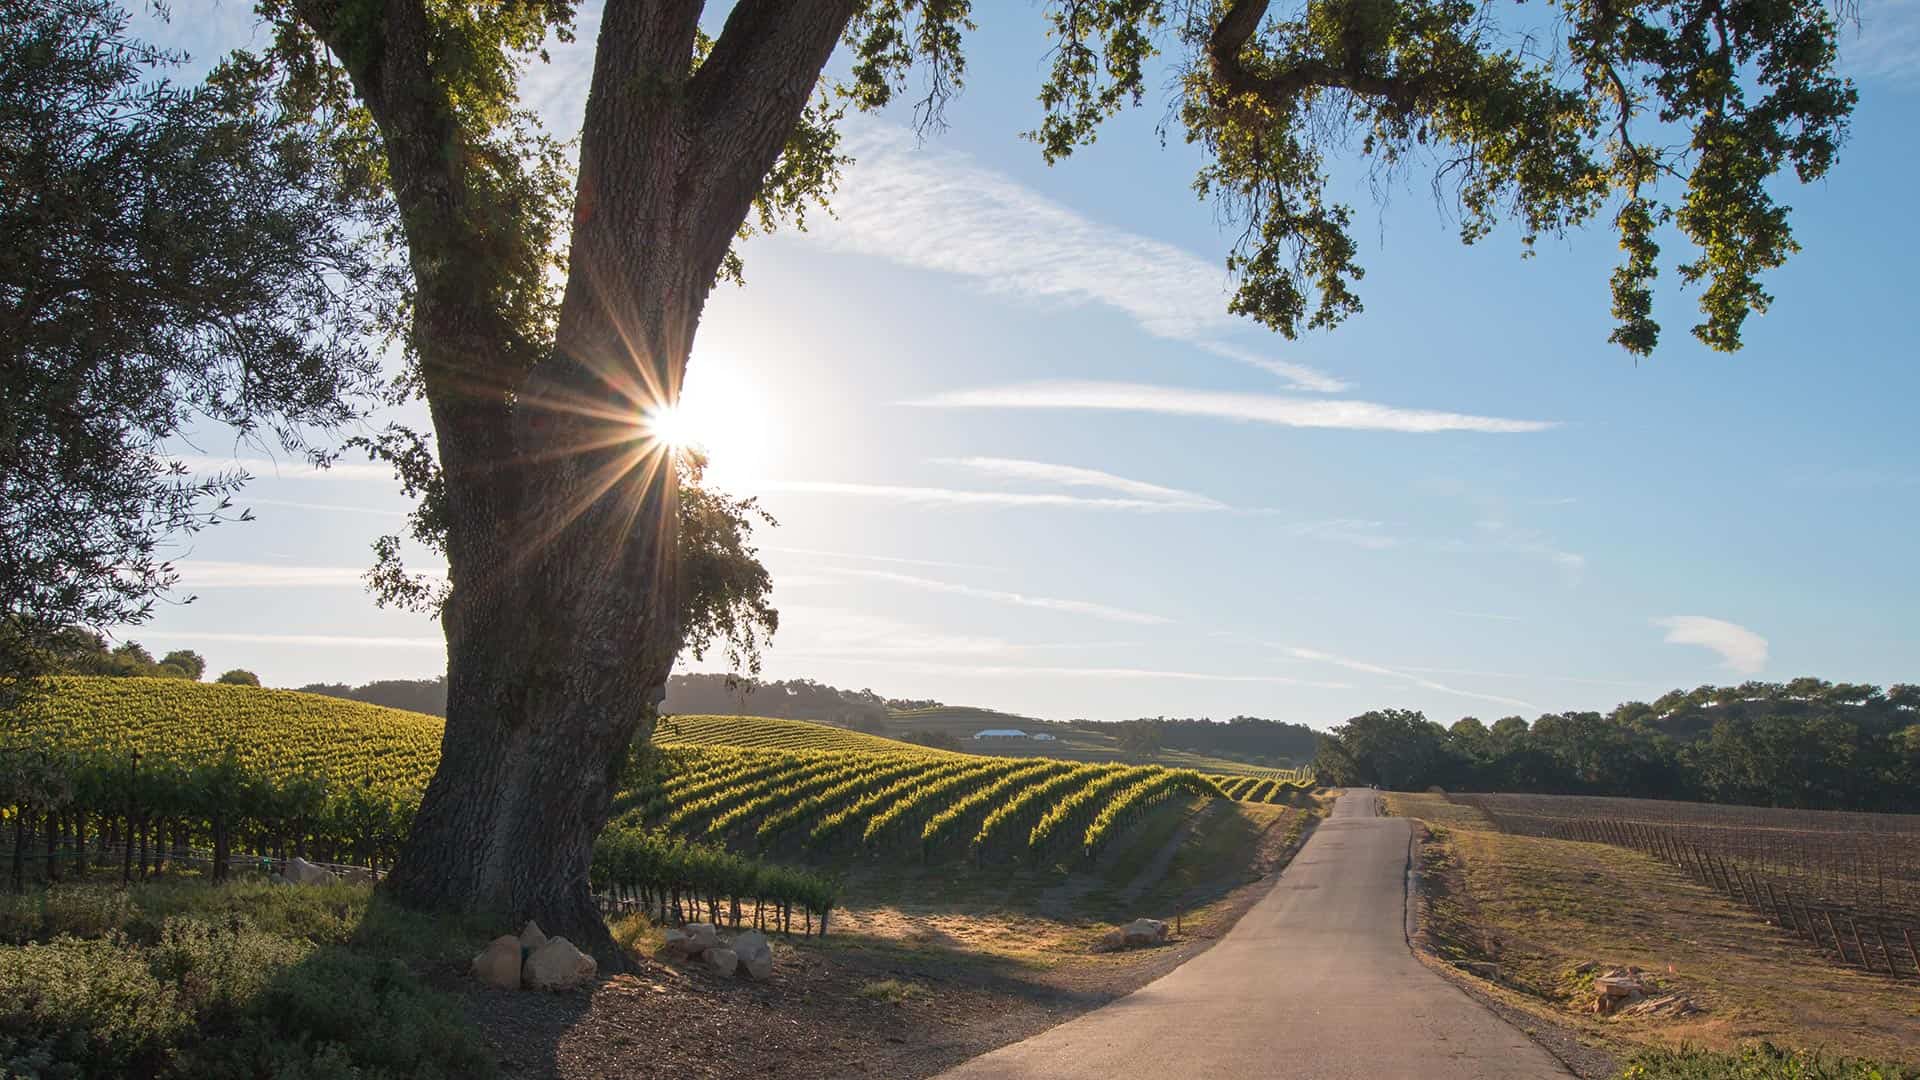 Paso Robles: A Rustic-Chic Country Town